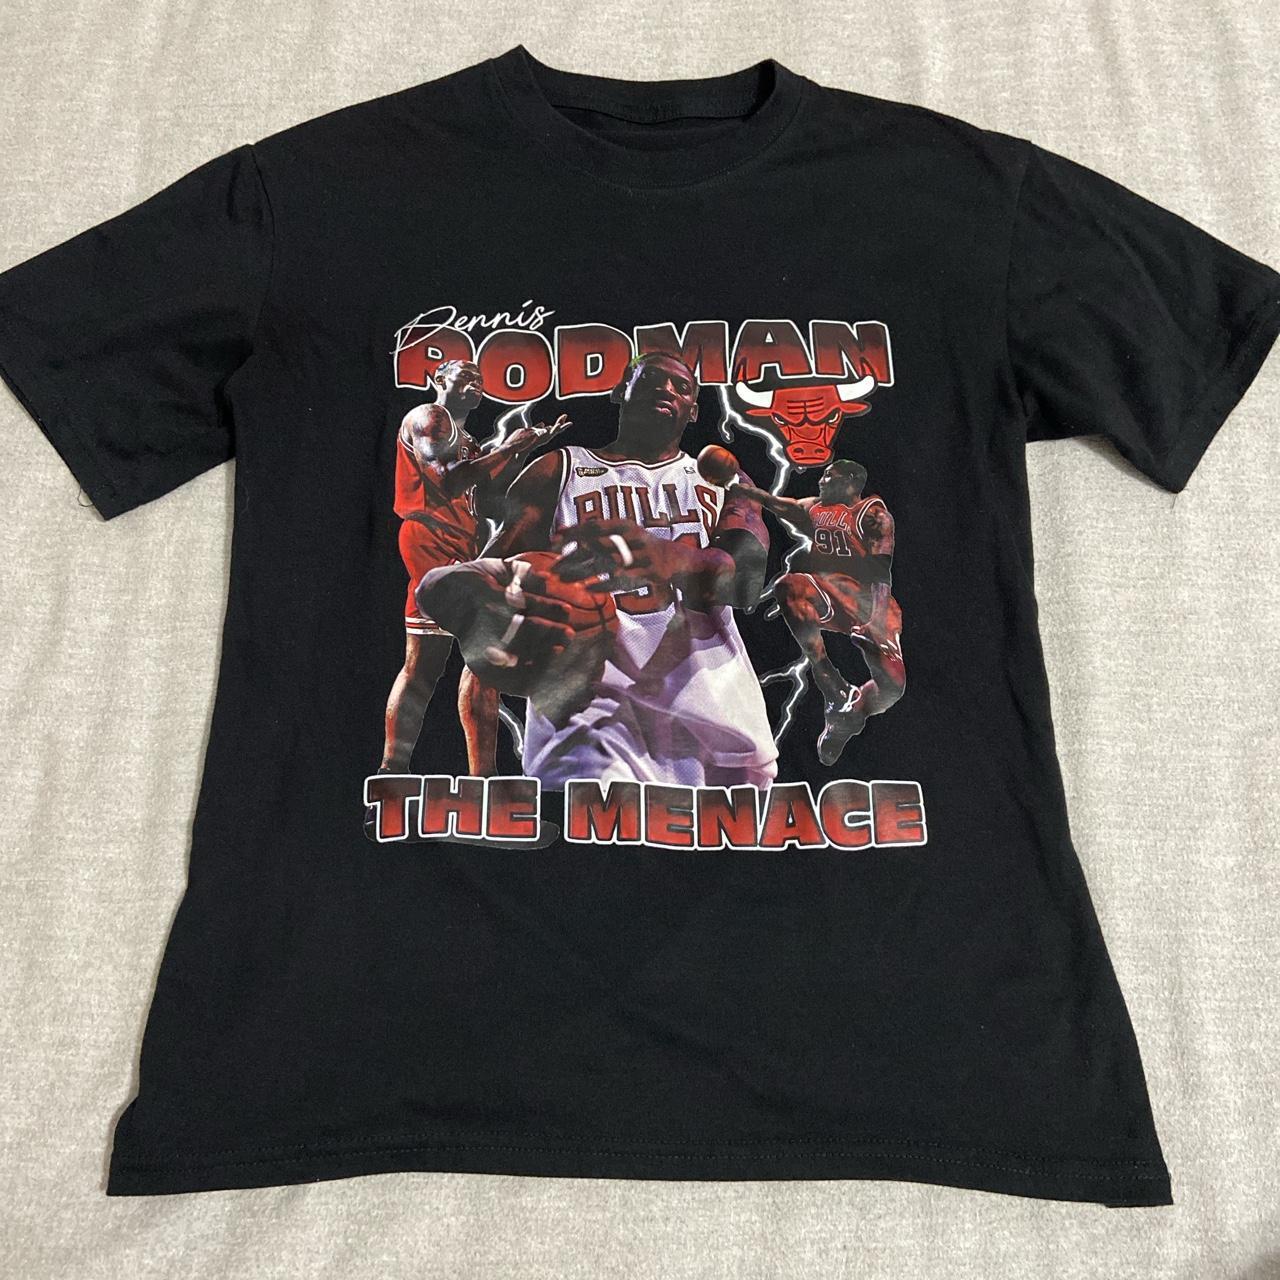 dennis the menace graphic tee Size small Some... - Depop